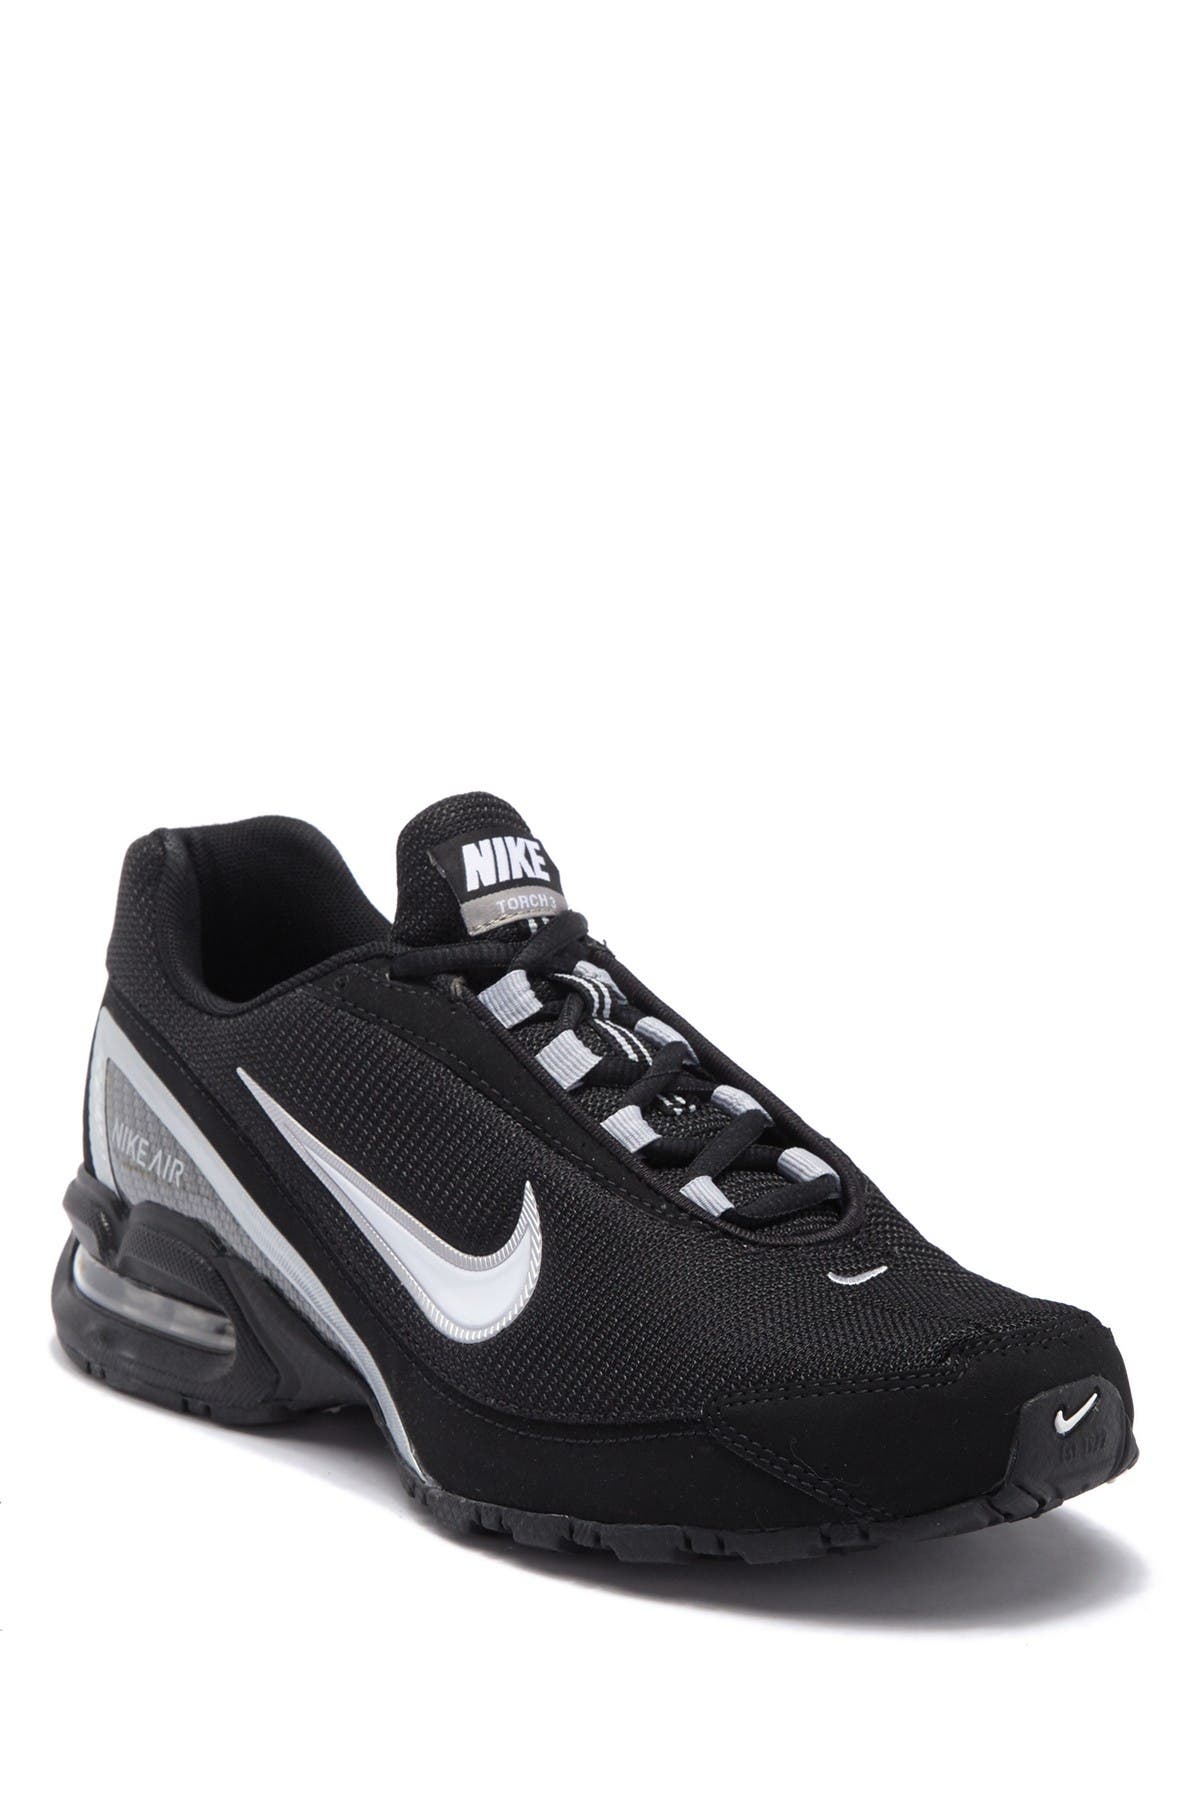 air max torch 3 men's running shoes